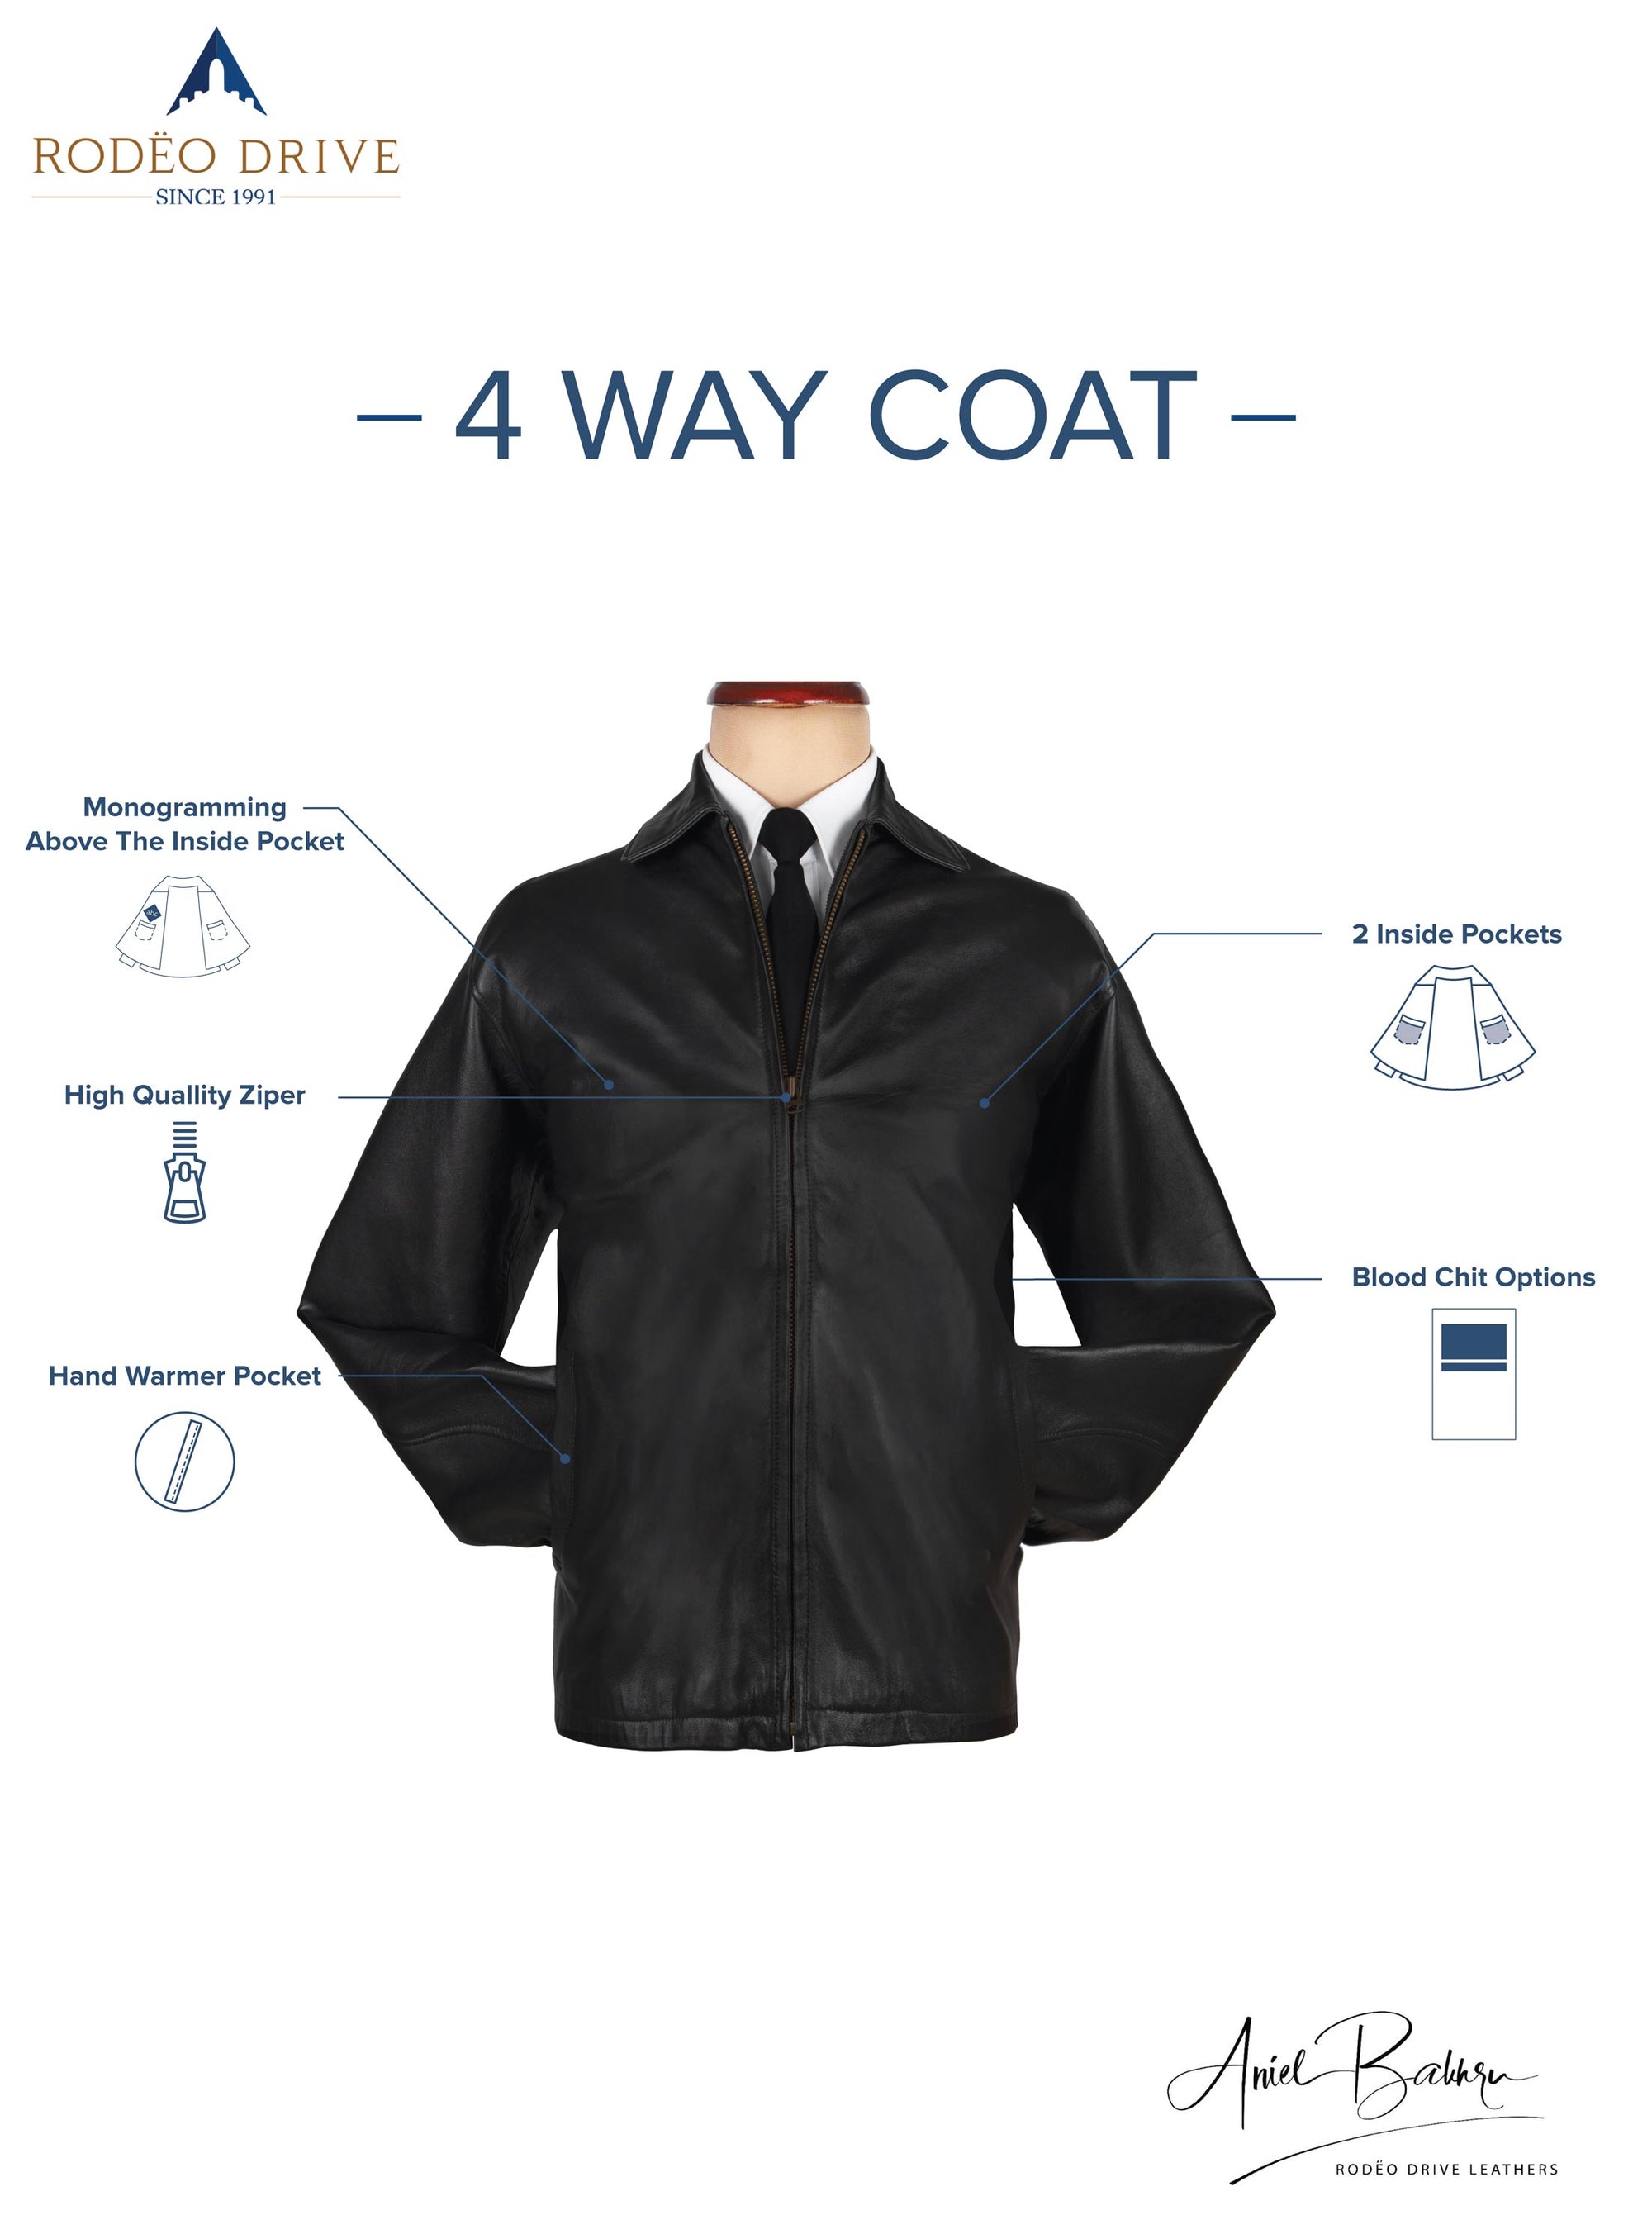 Full anatomy of Black Leather Jacket. Different parts and its utility is depicted.